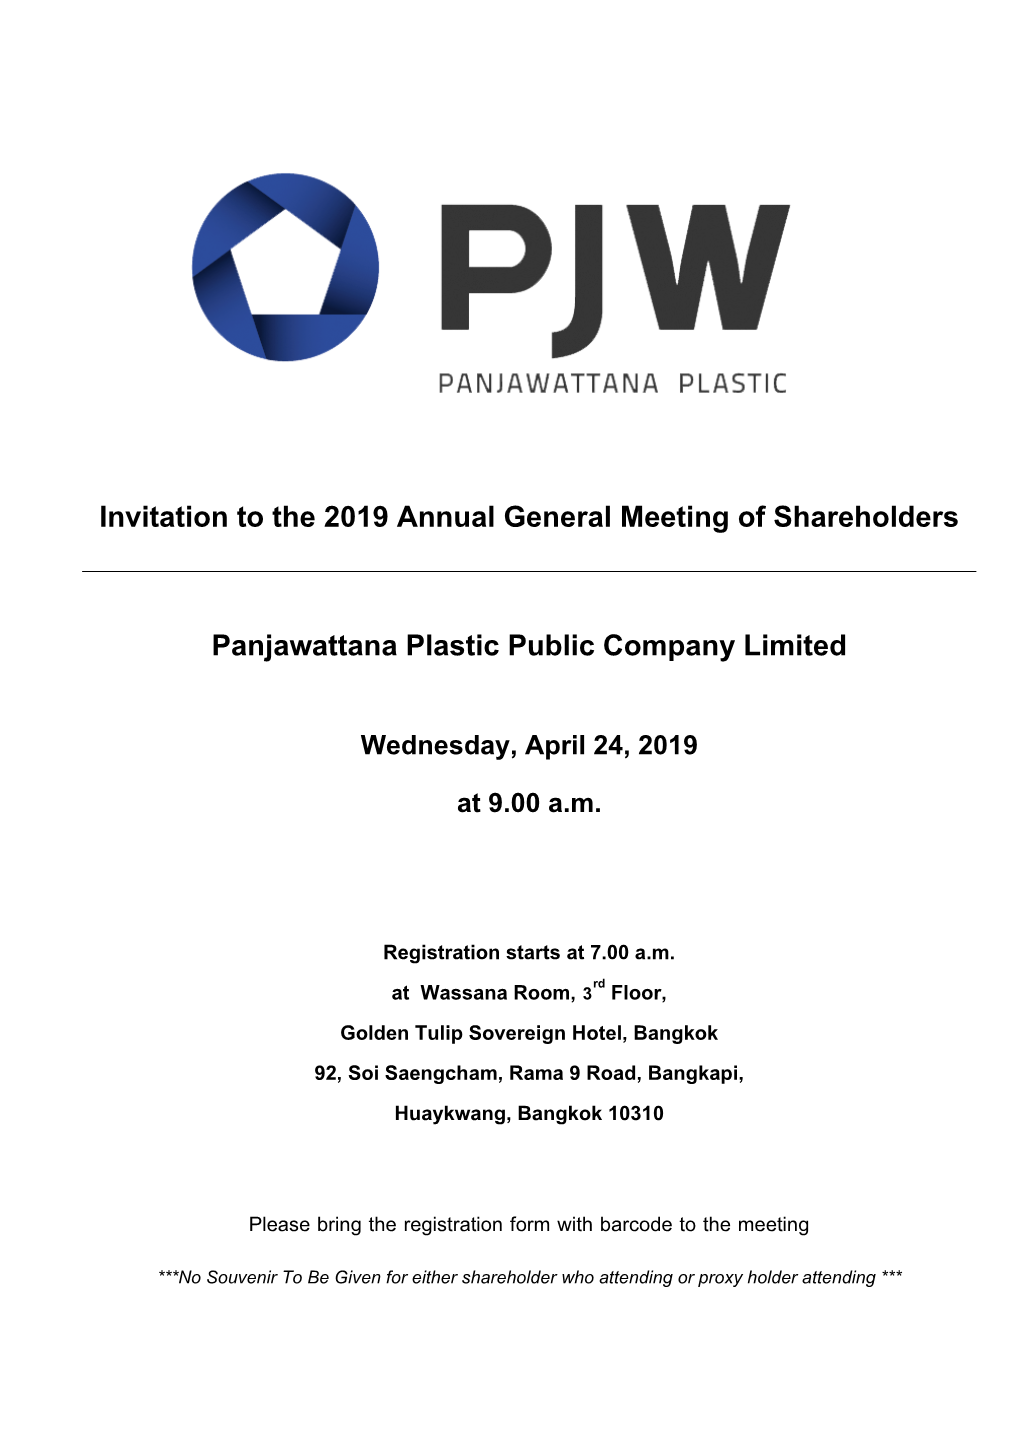 Invitation to the 2019 Annual Gerneral Meeting of Shareholders